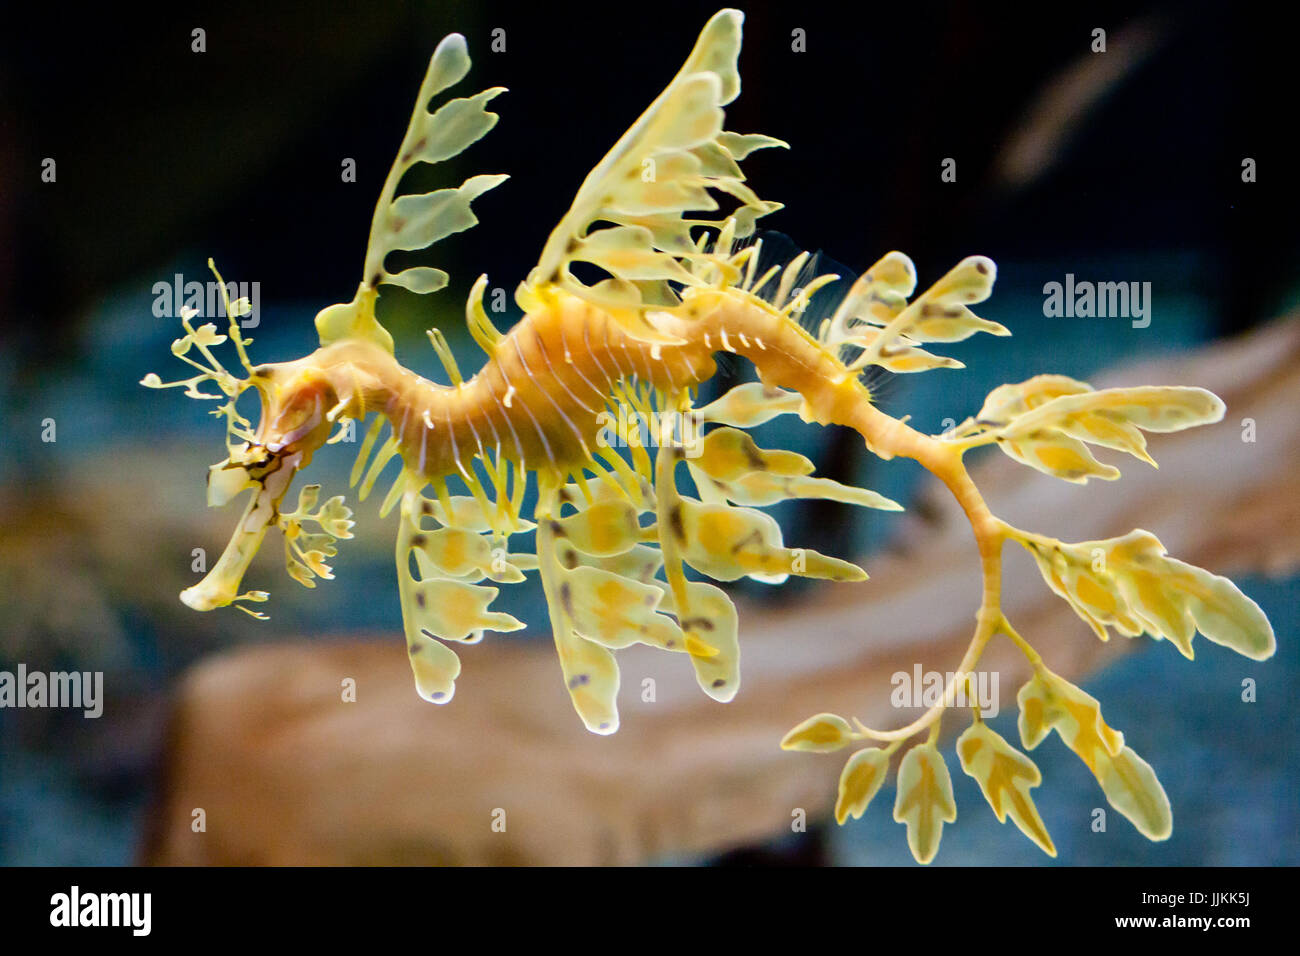 Leafy Seahorse in water Stock Photo